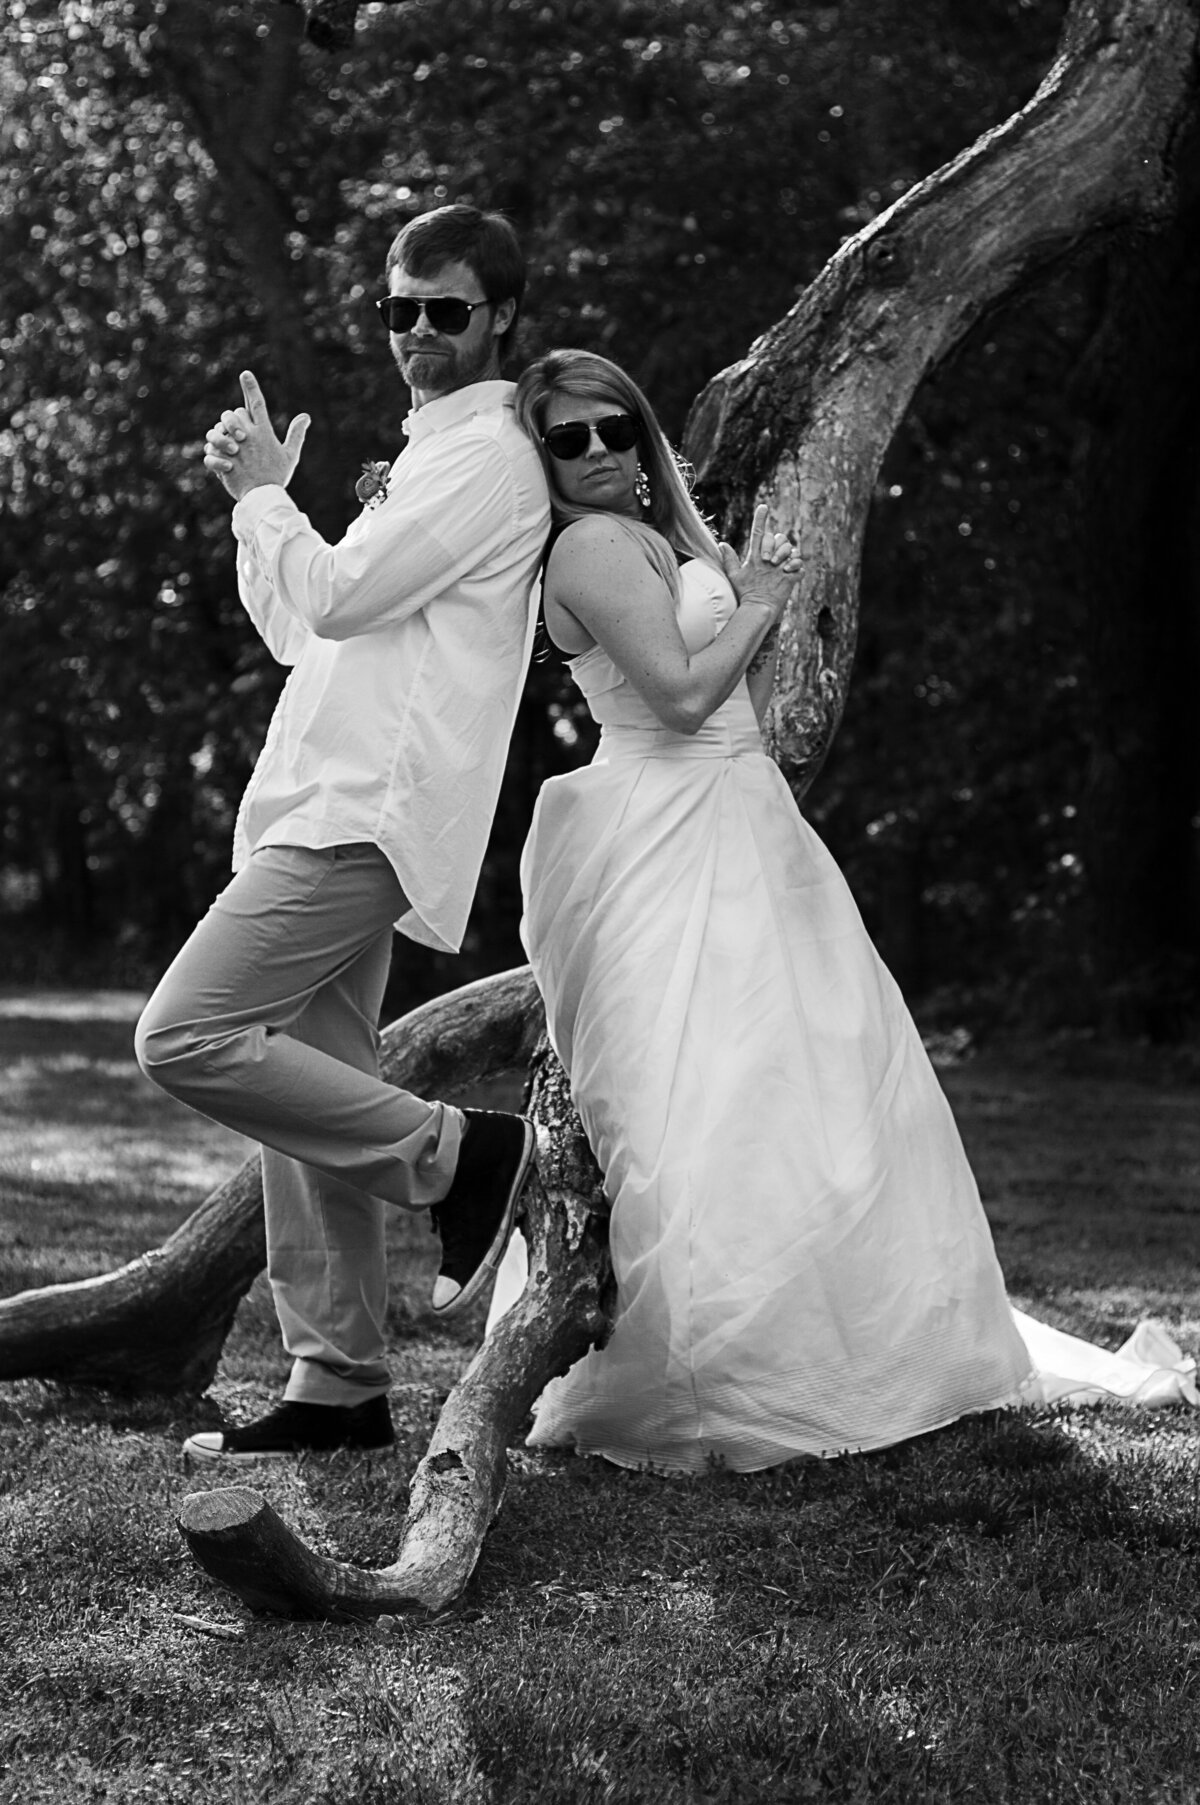 Ivory Peacock Photography & Design